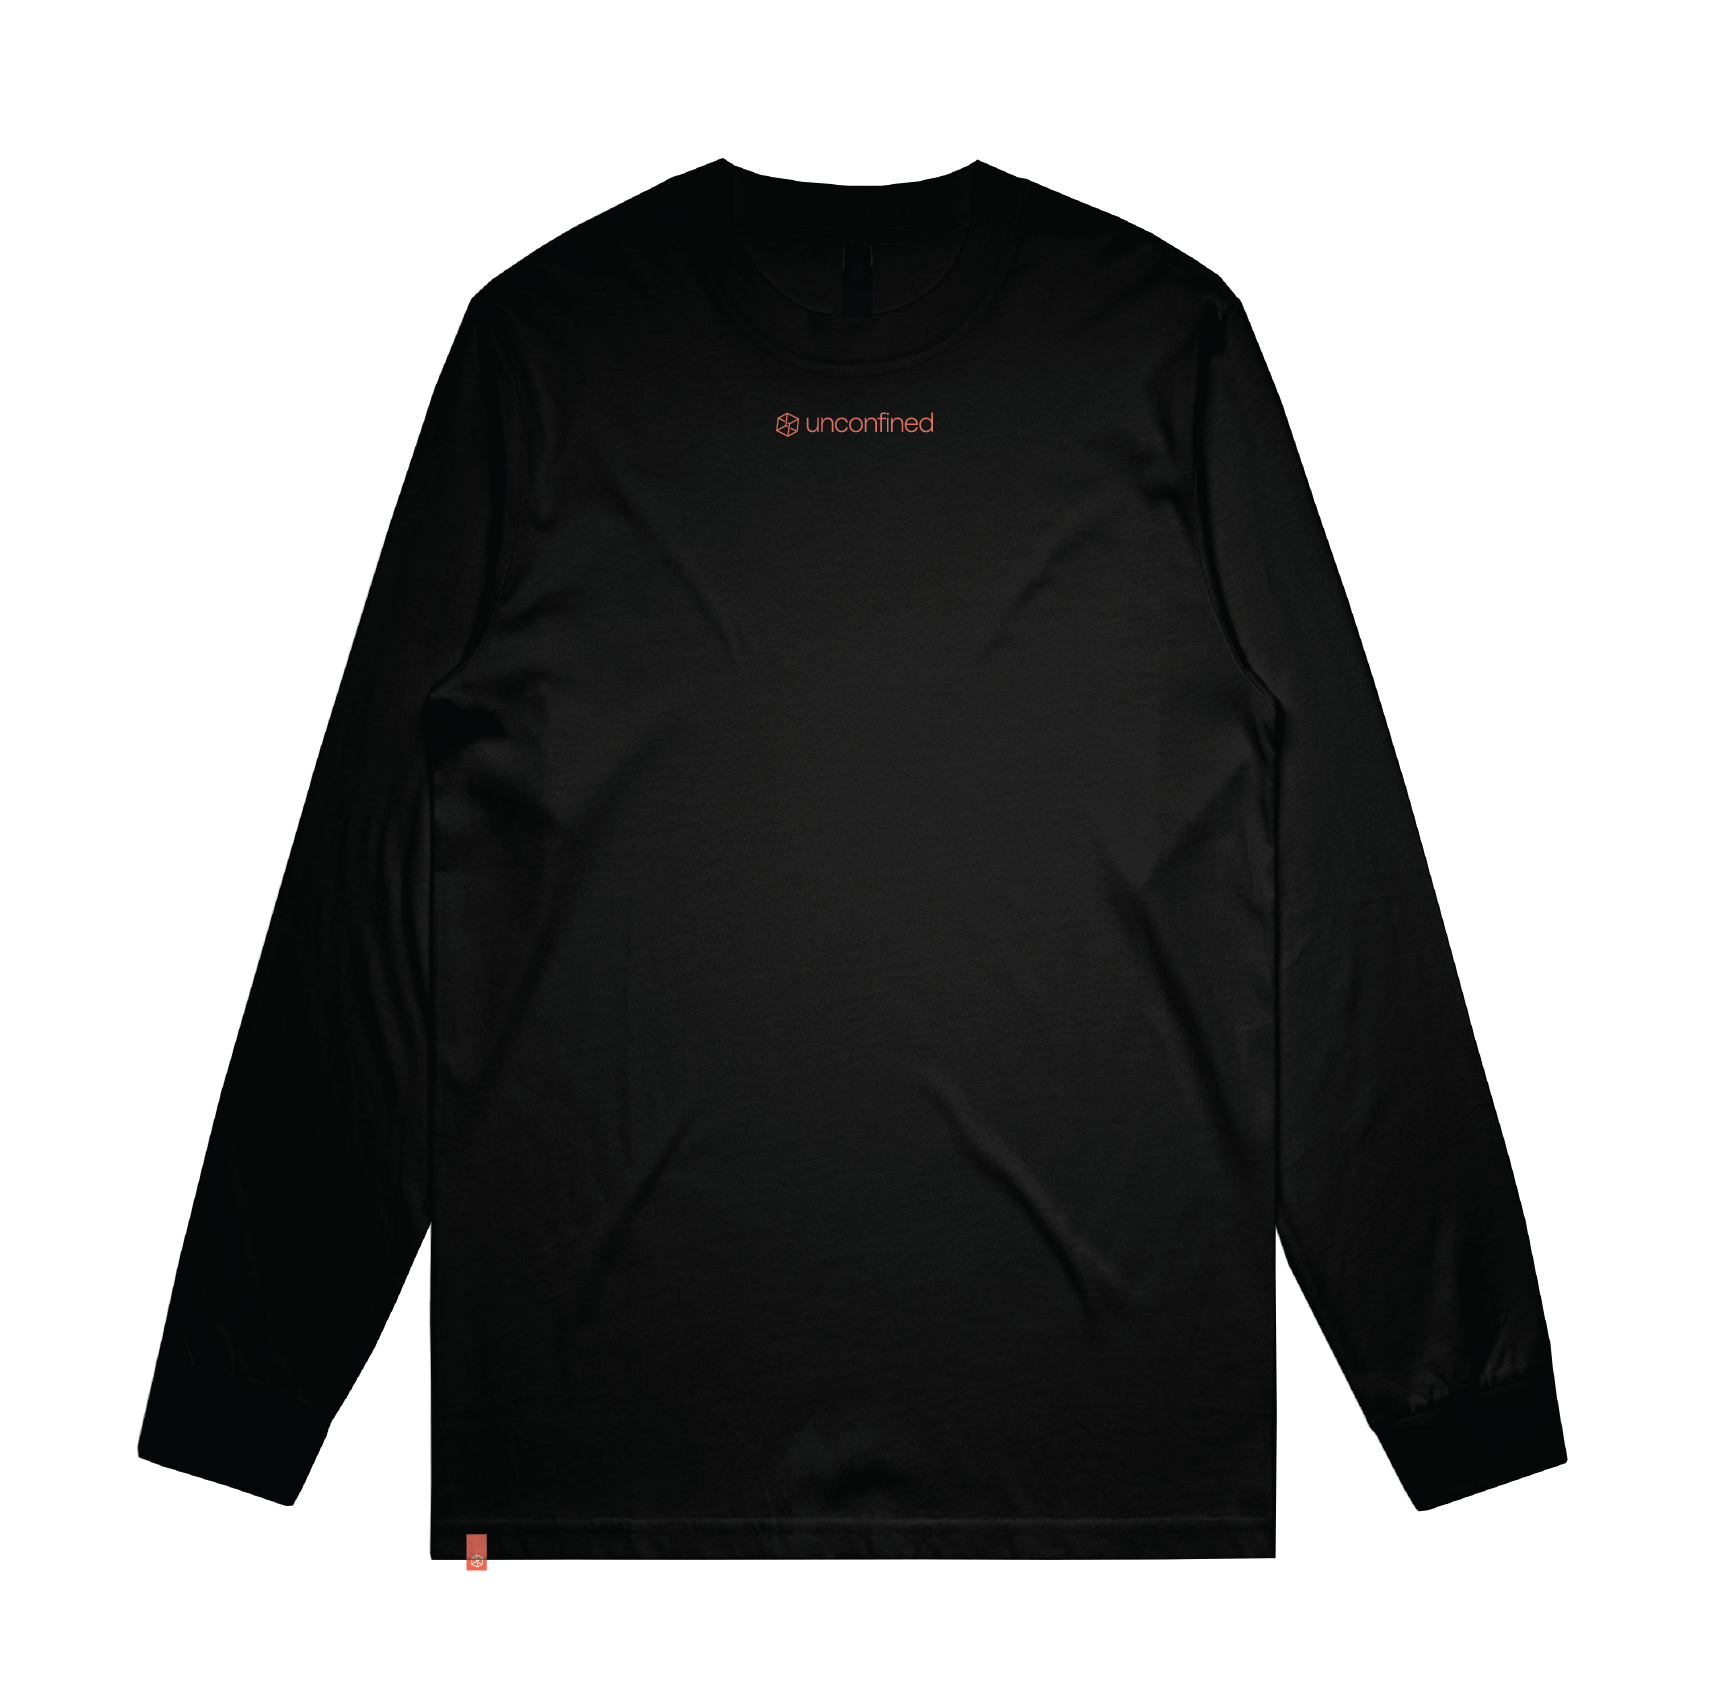 The Serpent Graphic Long Sleeve T-Shirt